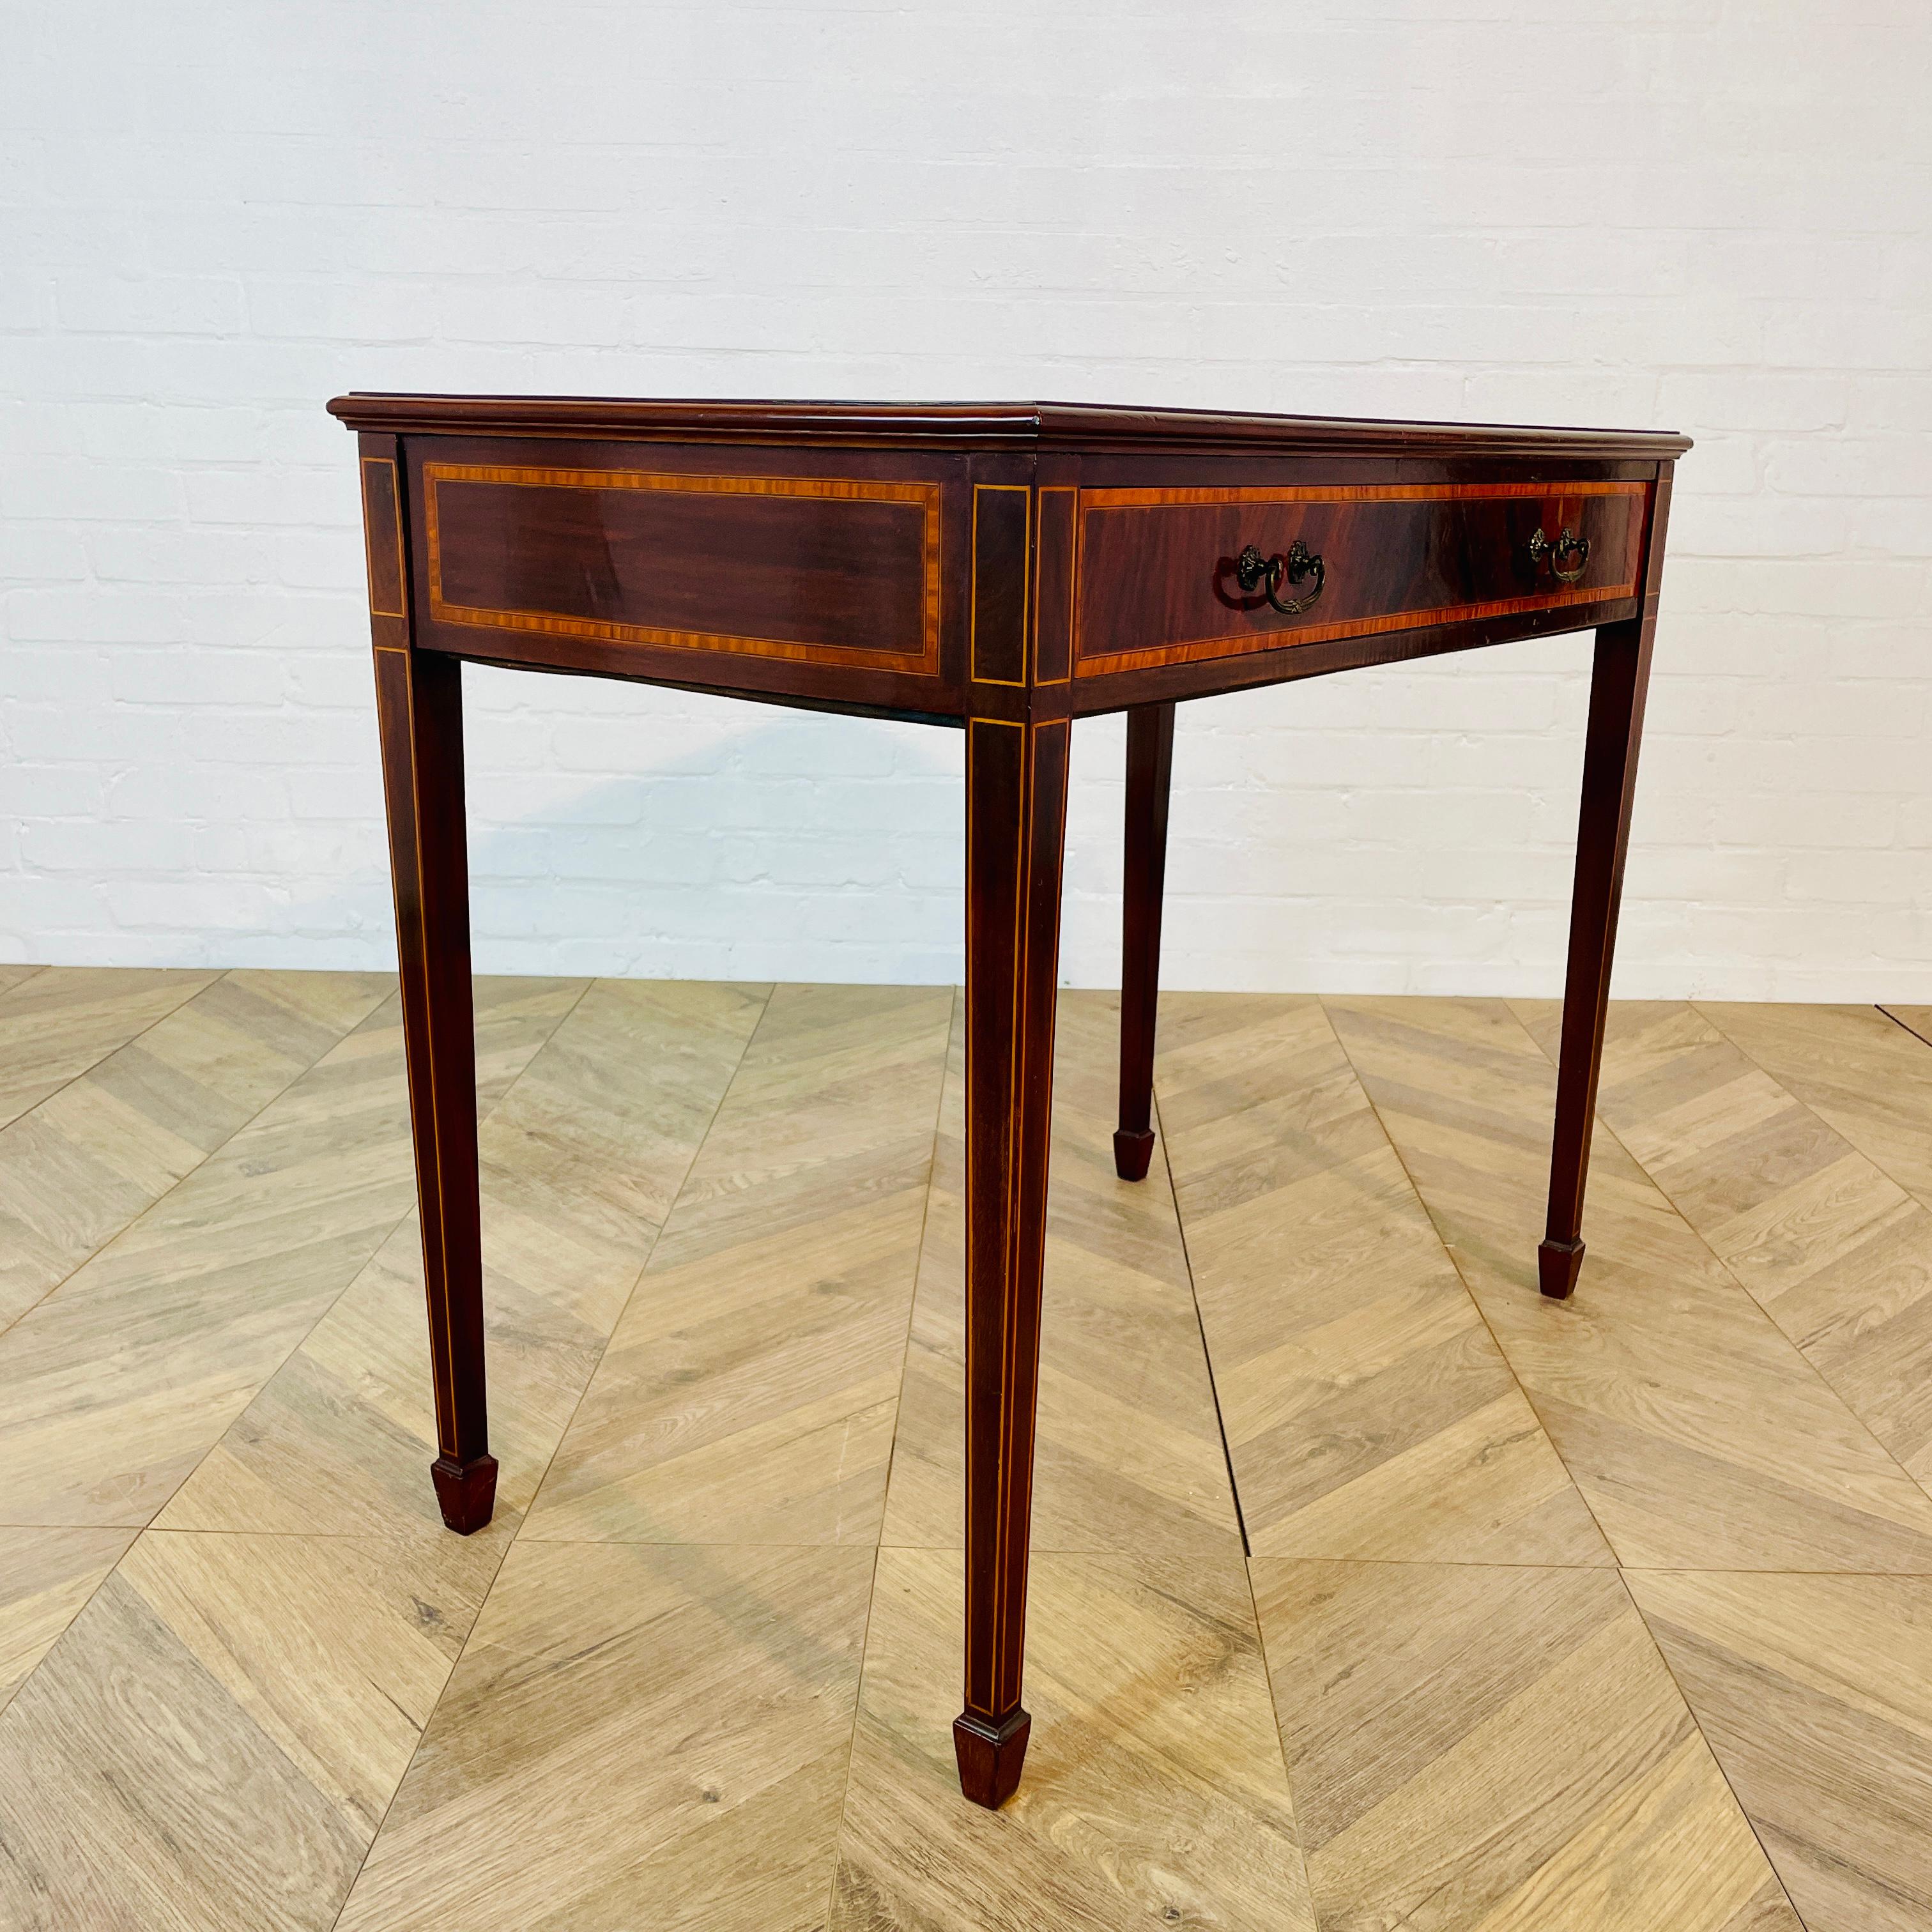 A Beautiful Antique Single Drawer Desk. circa 1910s.

Made from Mahogany and sitting on tapered legs, the table has good colour and patination and nice proportions.

Structurally, the table is good condition, with the drawer moving as it should, and